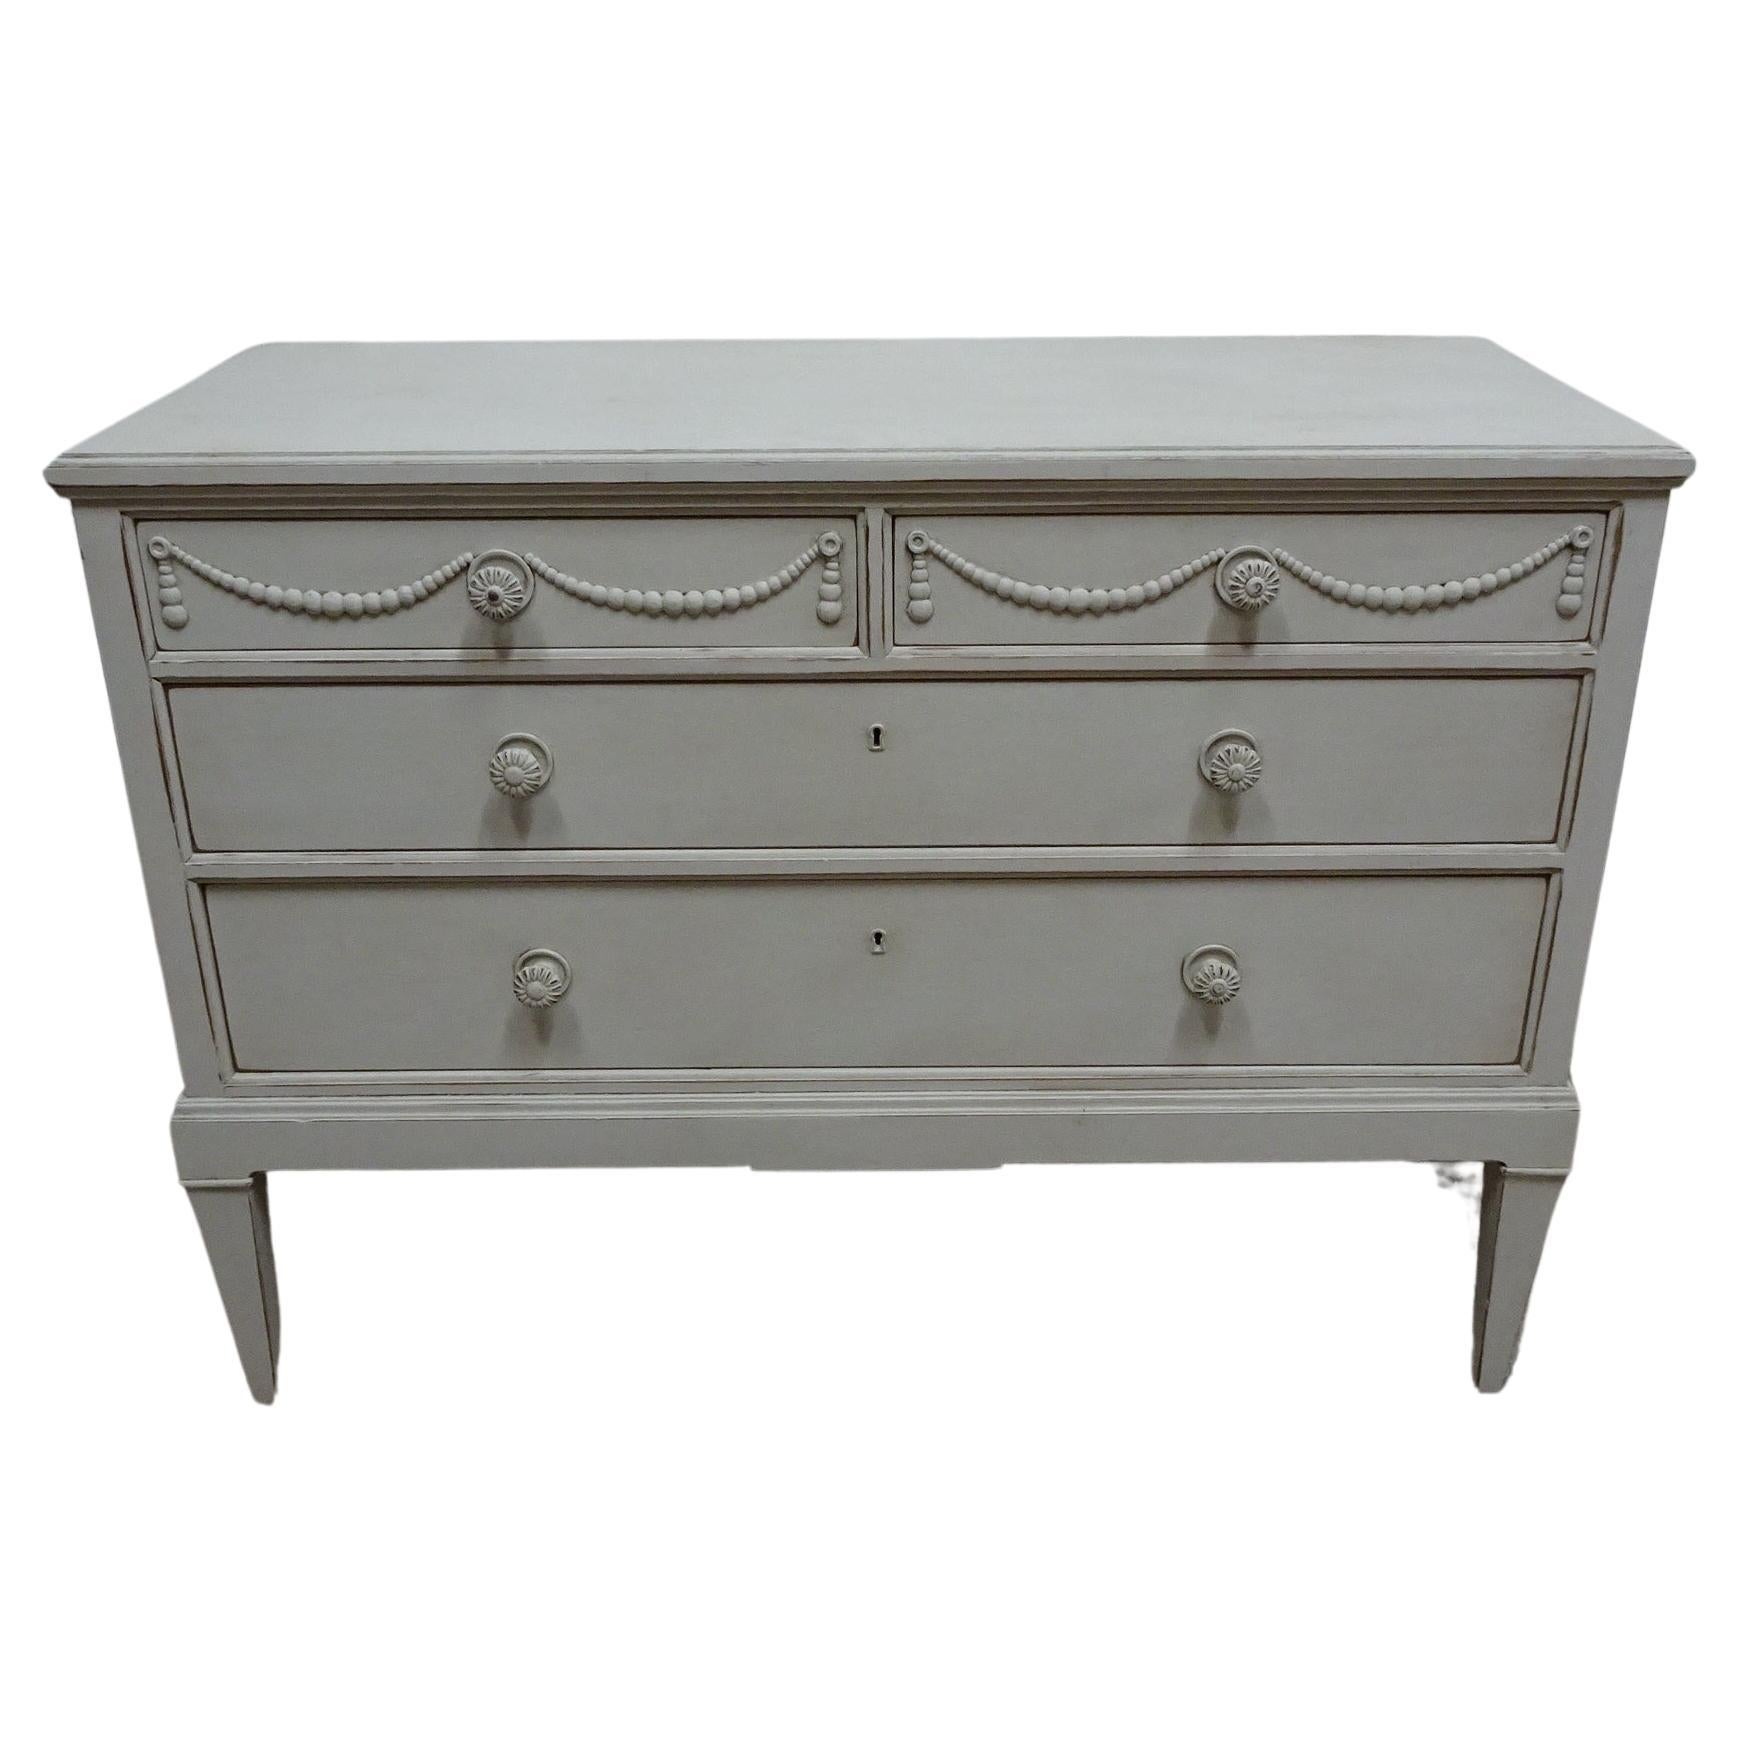 Unique Swedish Gustavian Style 3 Drawer Chest Of Drawers For Sale